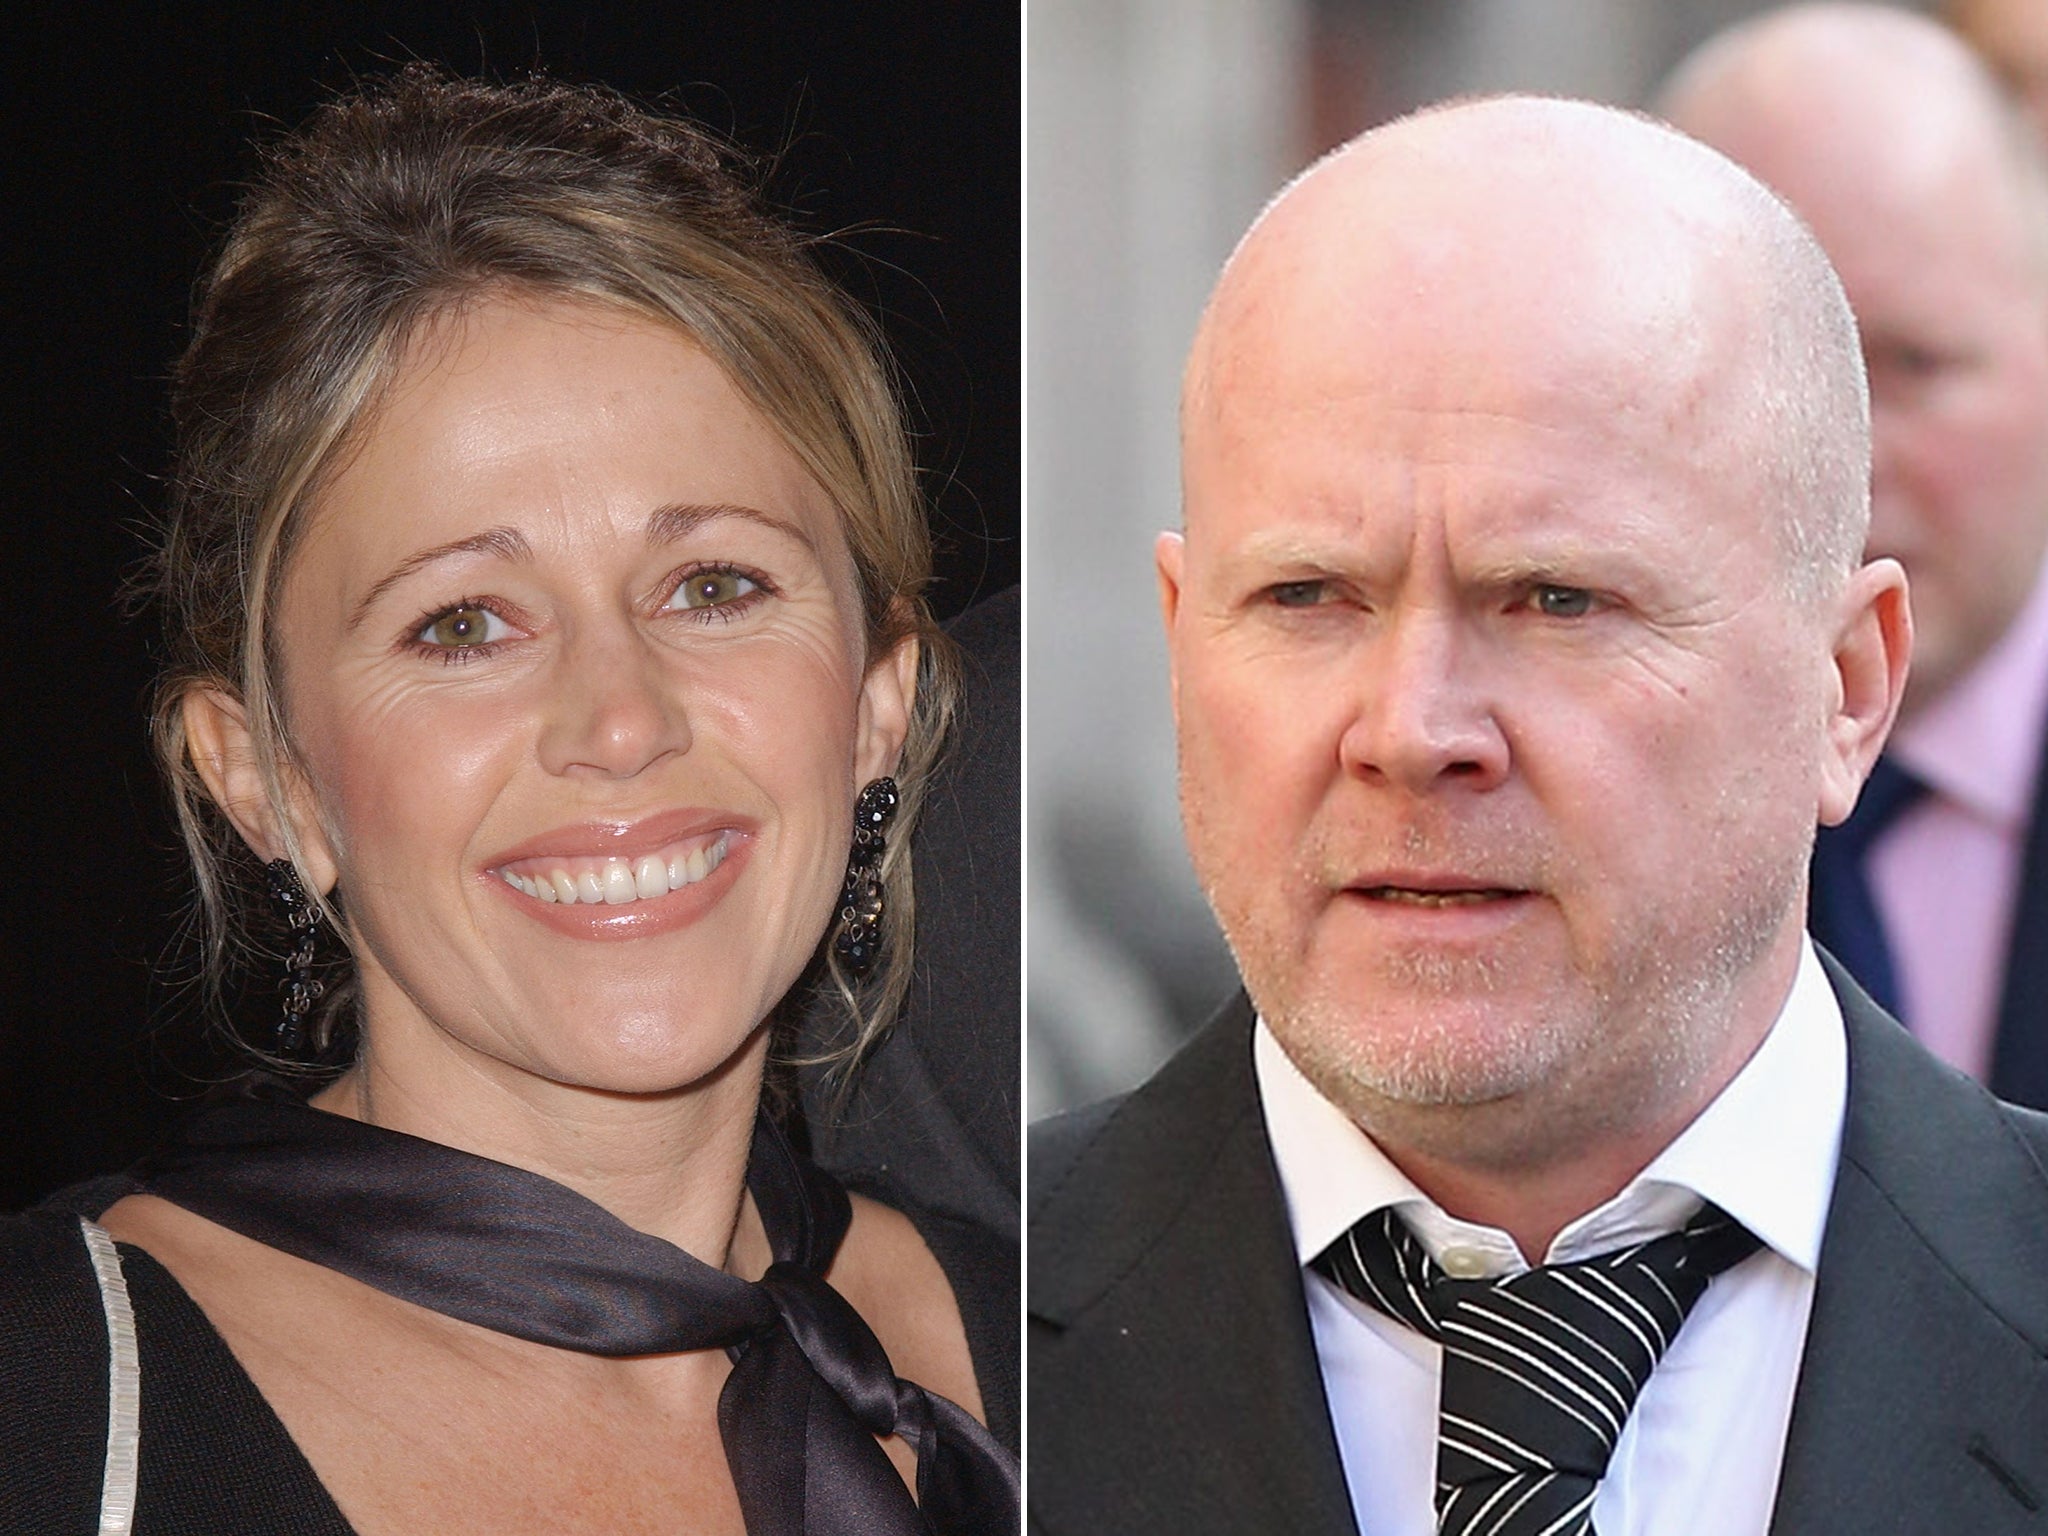 'EastEnders' actors Lucy Benjamin and Steve McFadden were mentioned in some of the emails